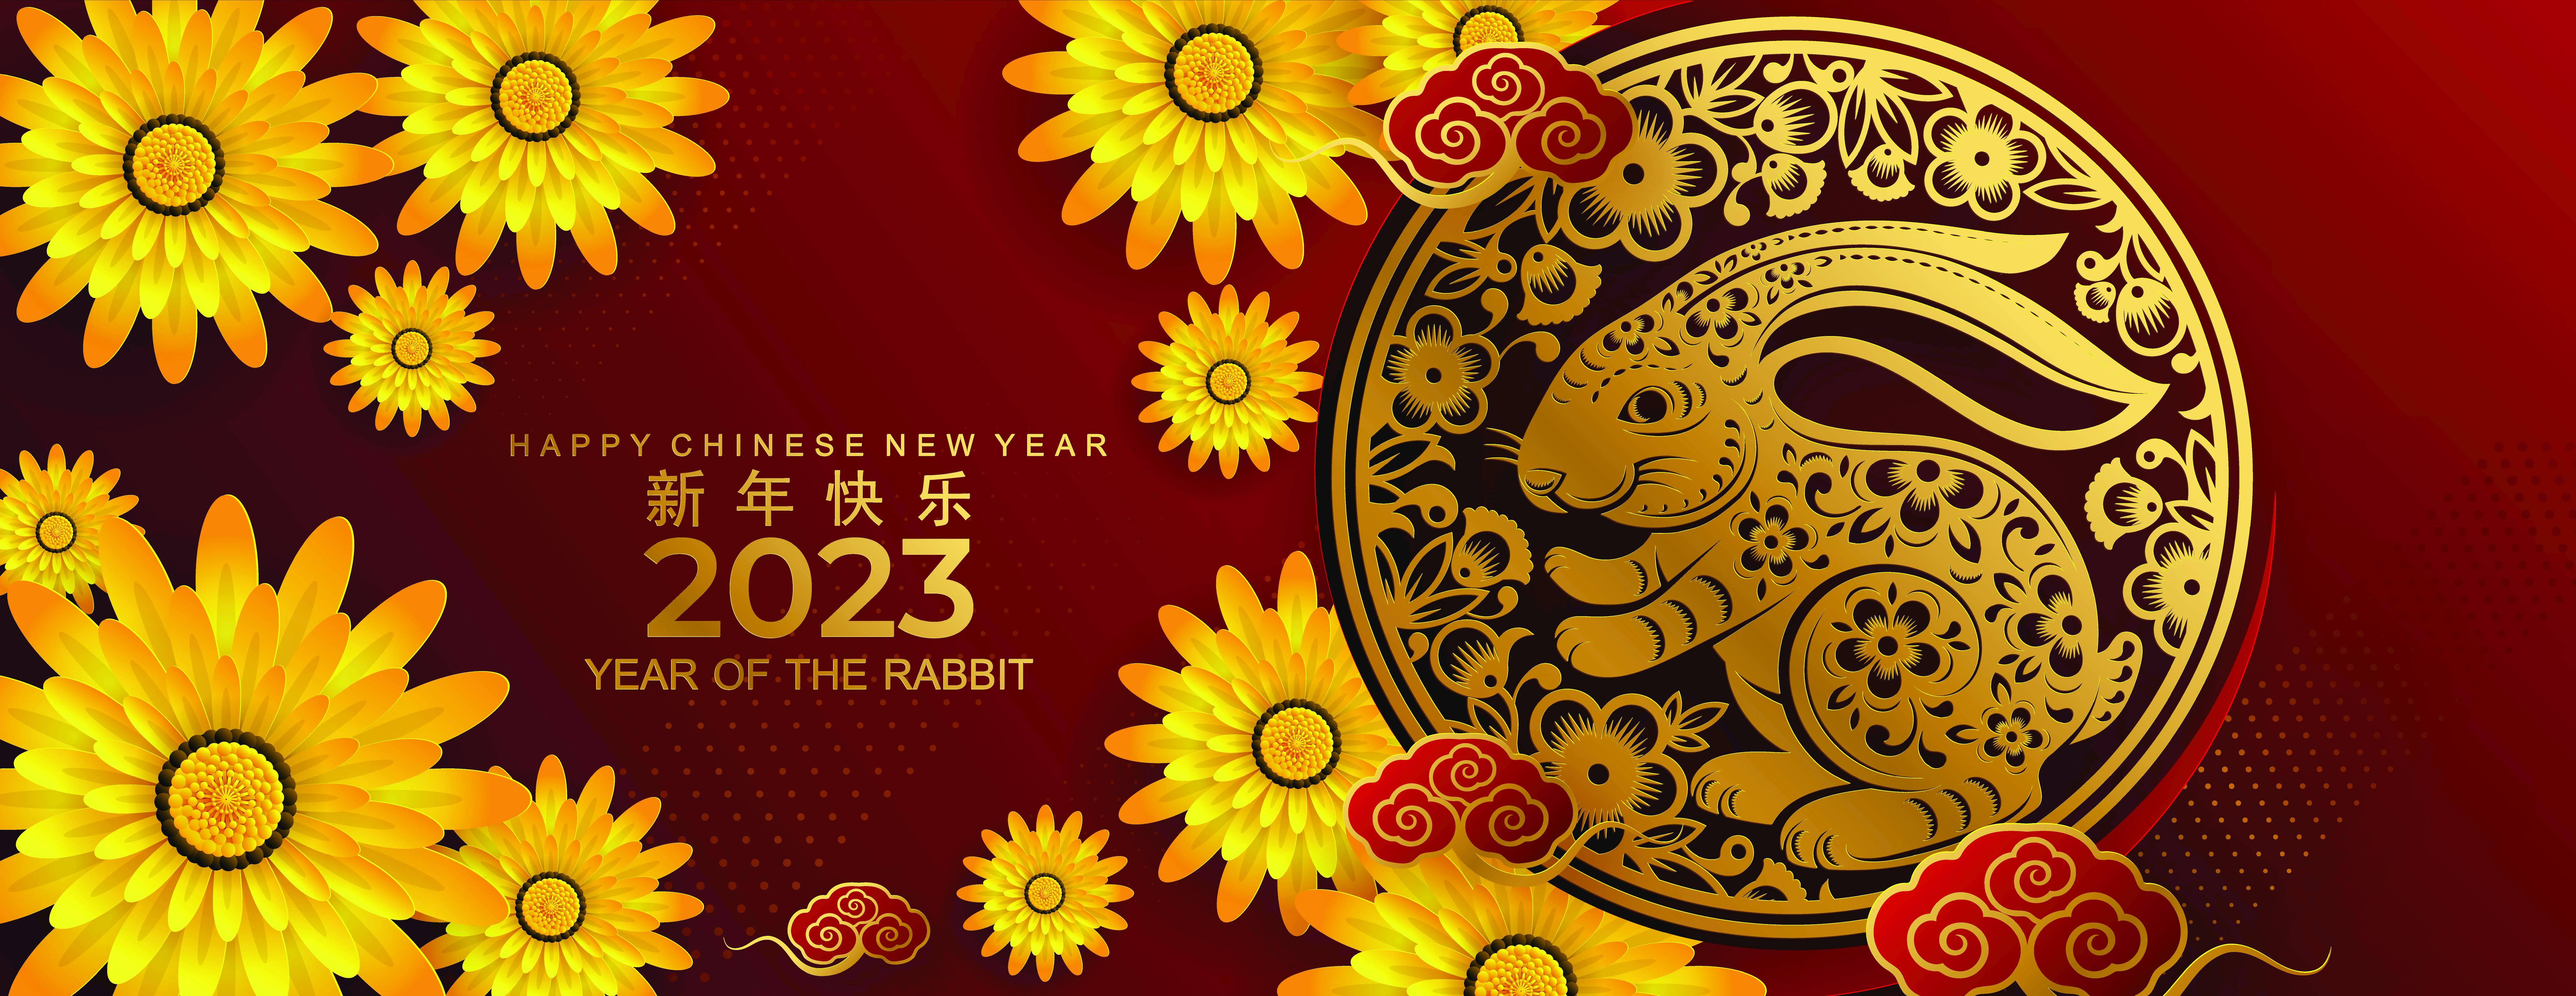 Lunar New Year 2023: What to Know About the Year of the Rabbit